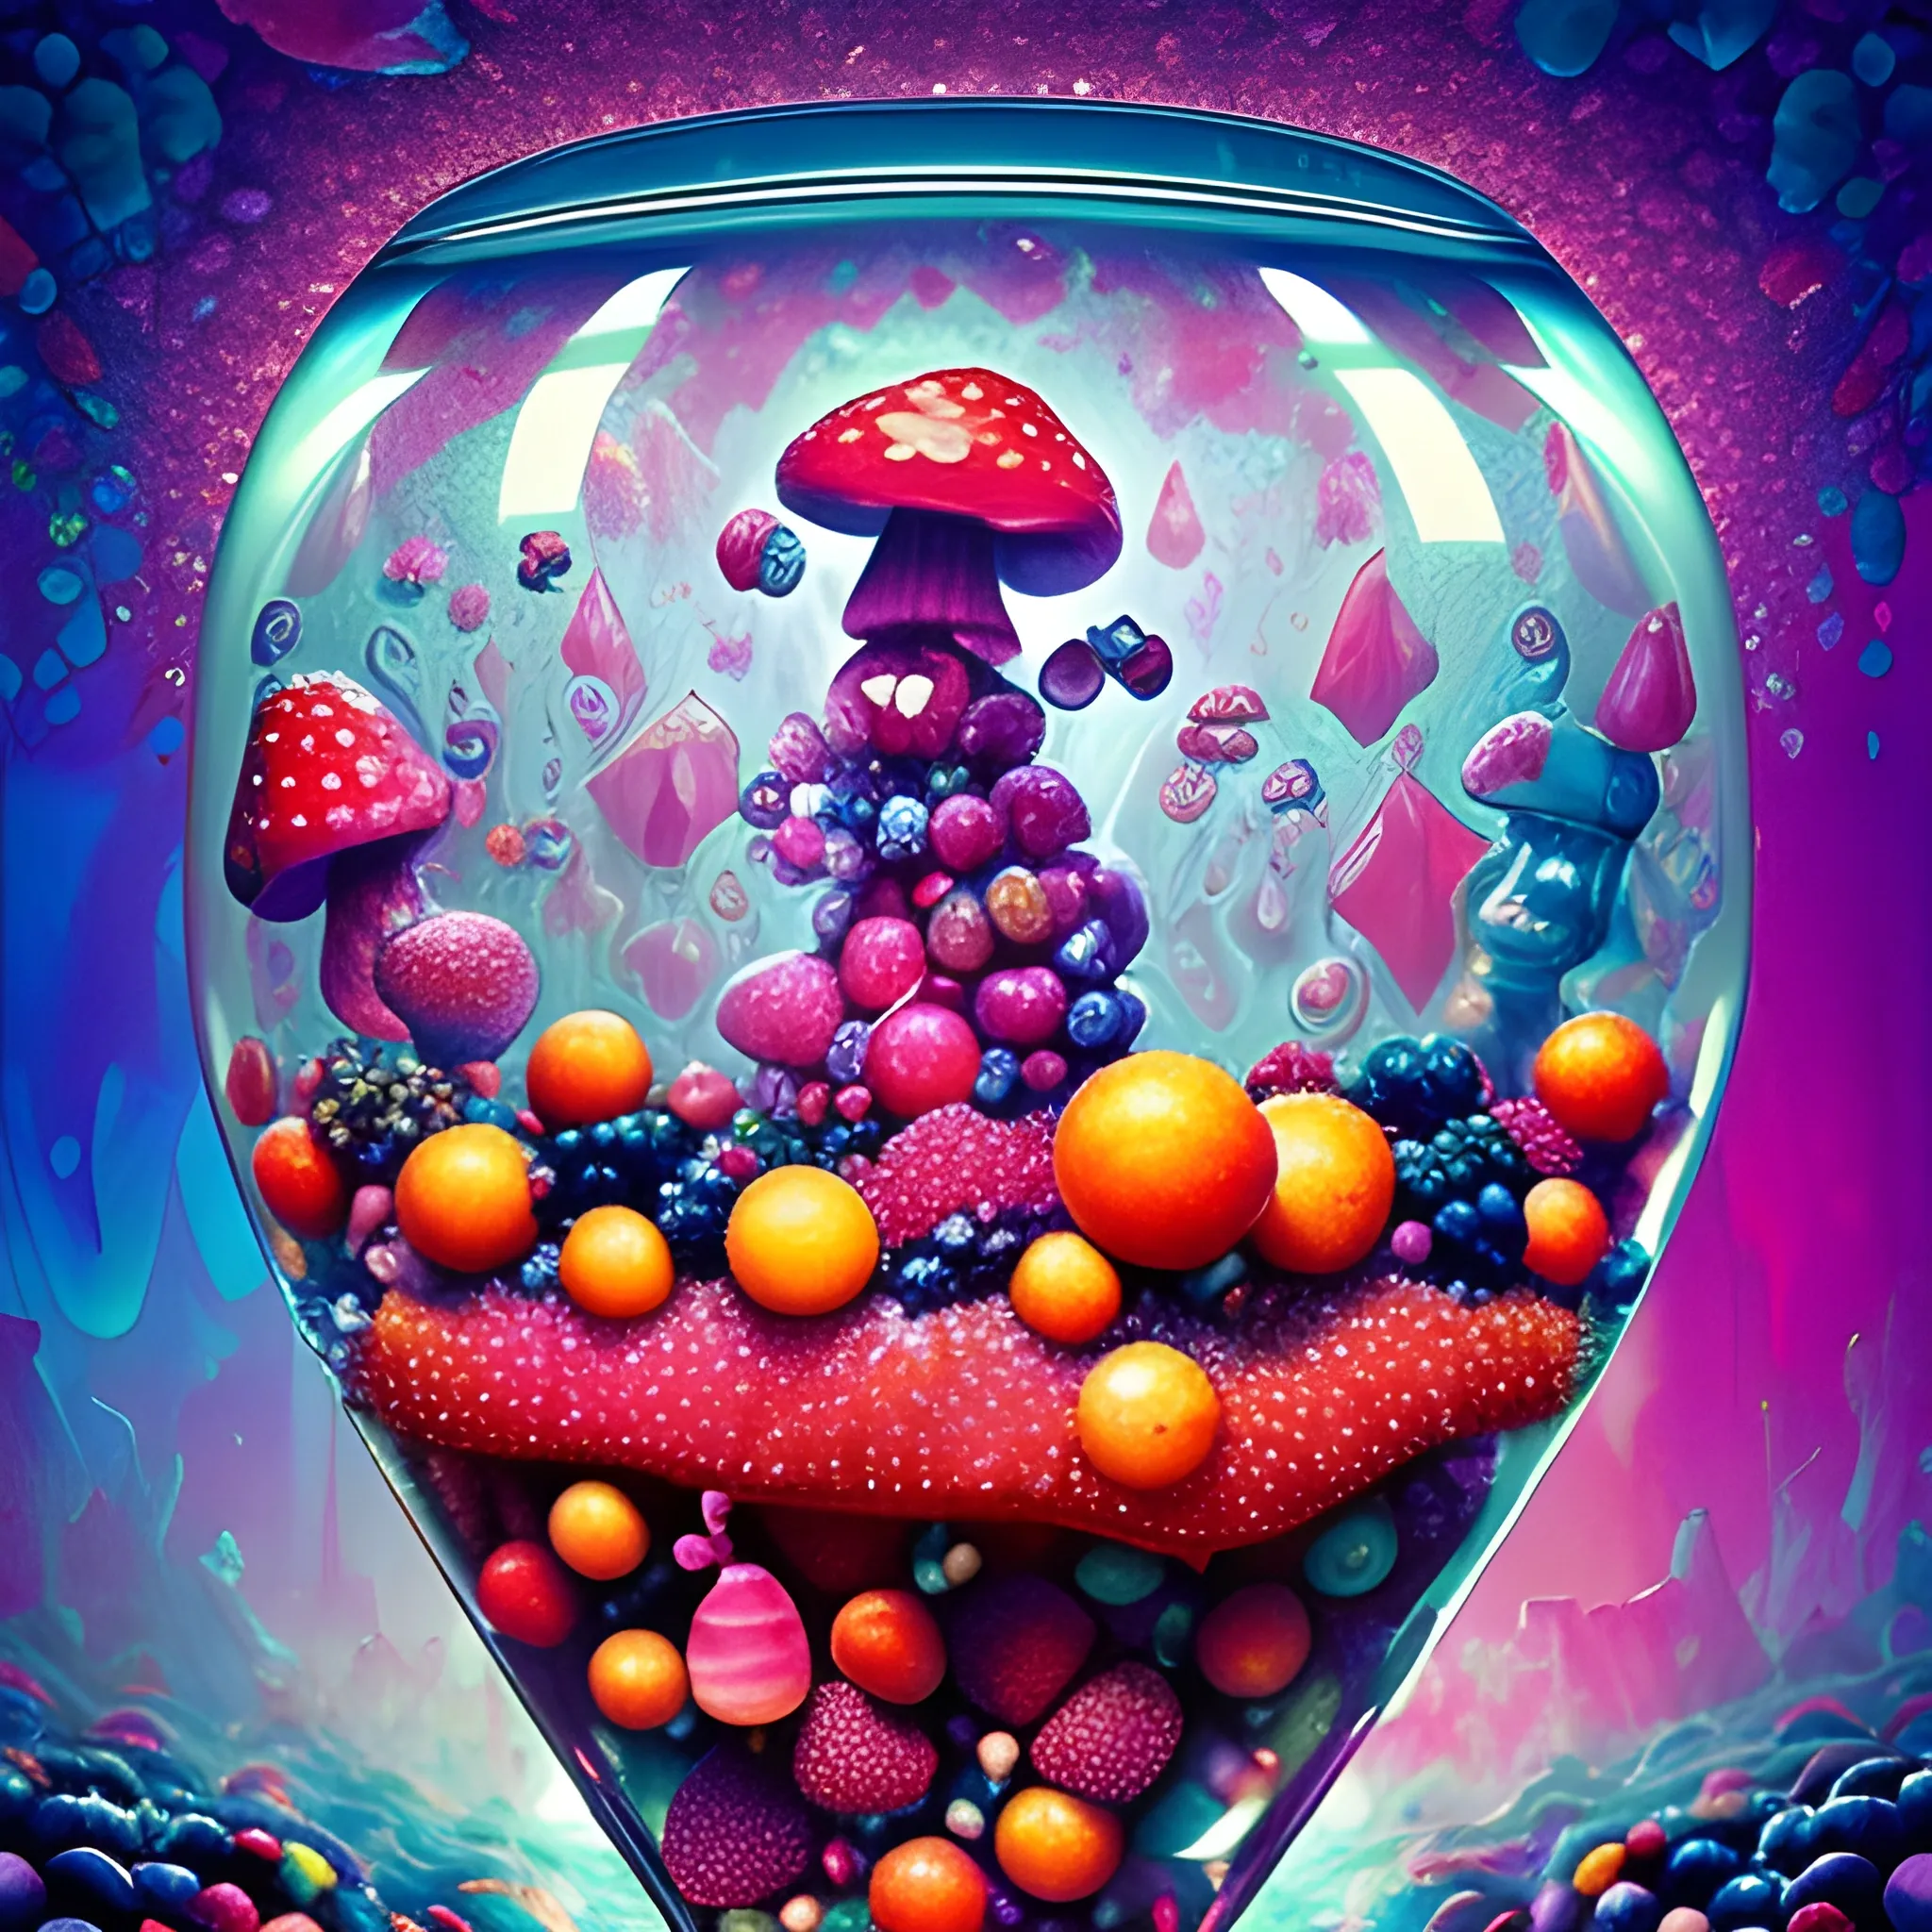 many crystal crazy mushrooms with human face, crystal blueberries, strawberries, loquats, raspberries around, many broken glass in the air, saturated colors, surrealism, chaotic background, 3D, Trippy,  eerie atmosphere, close up, Oil Painting, angular perspective 